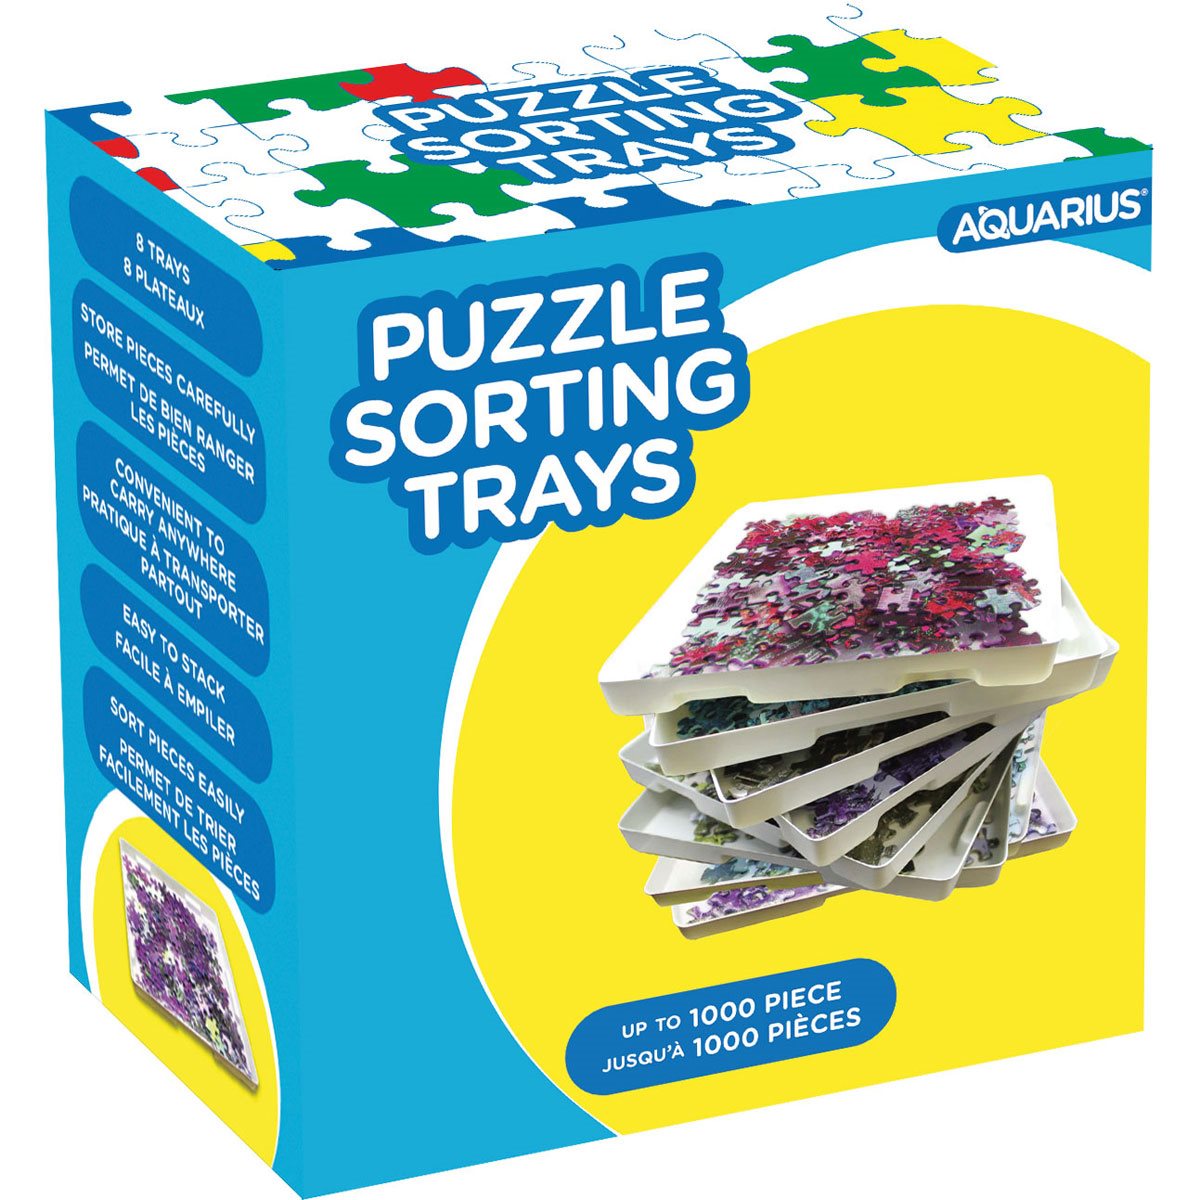 PUZZLE EZ - Jigsaw Puzzle Sorting Trays 